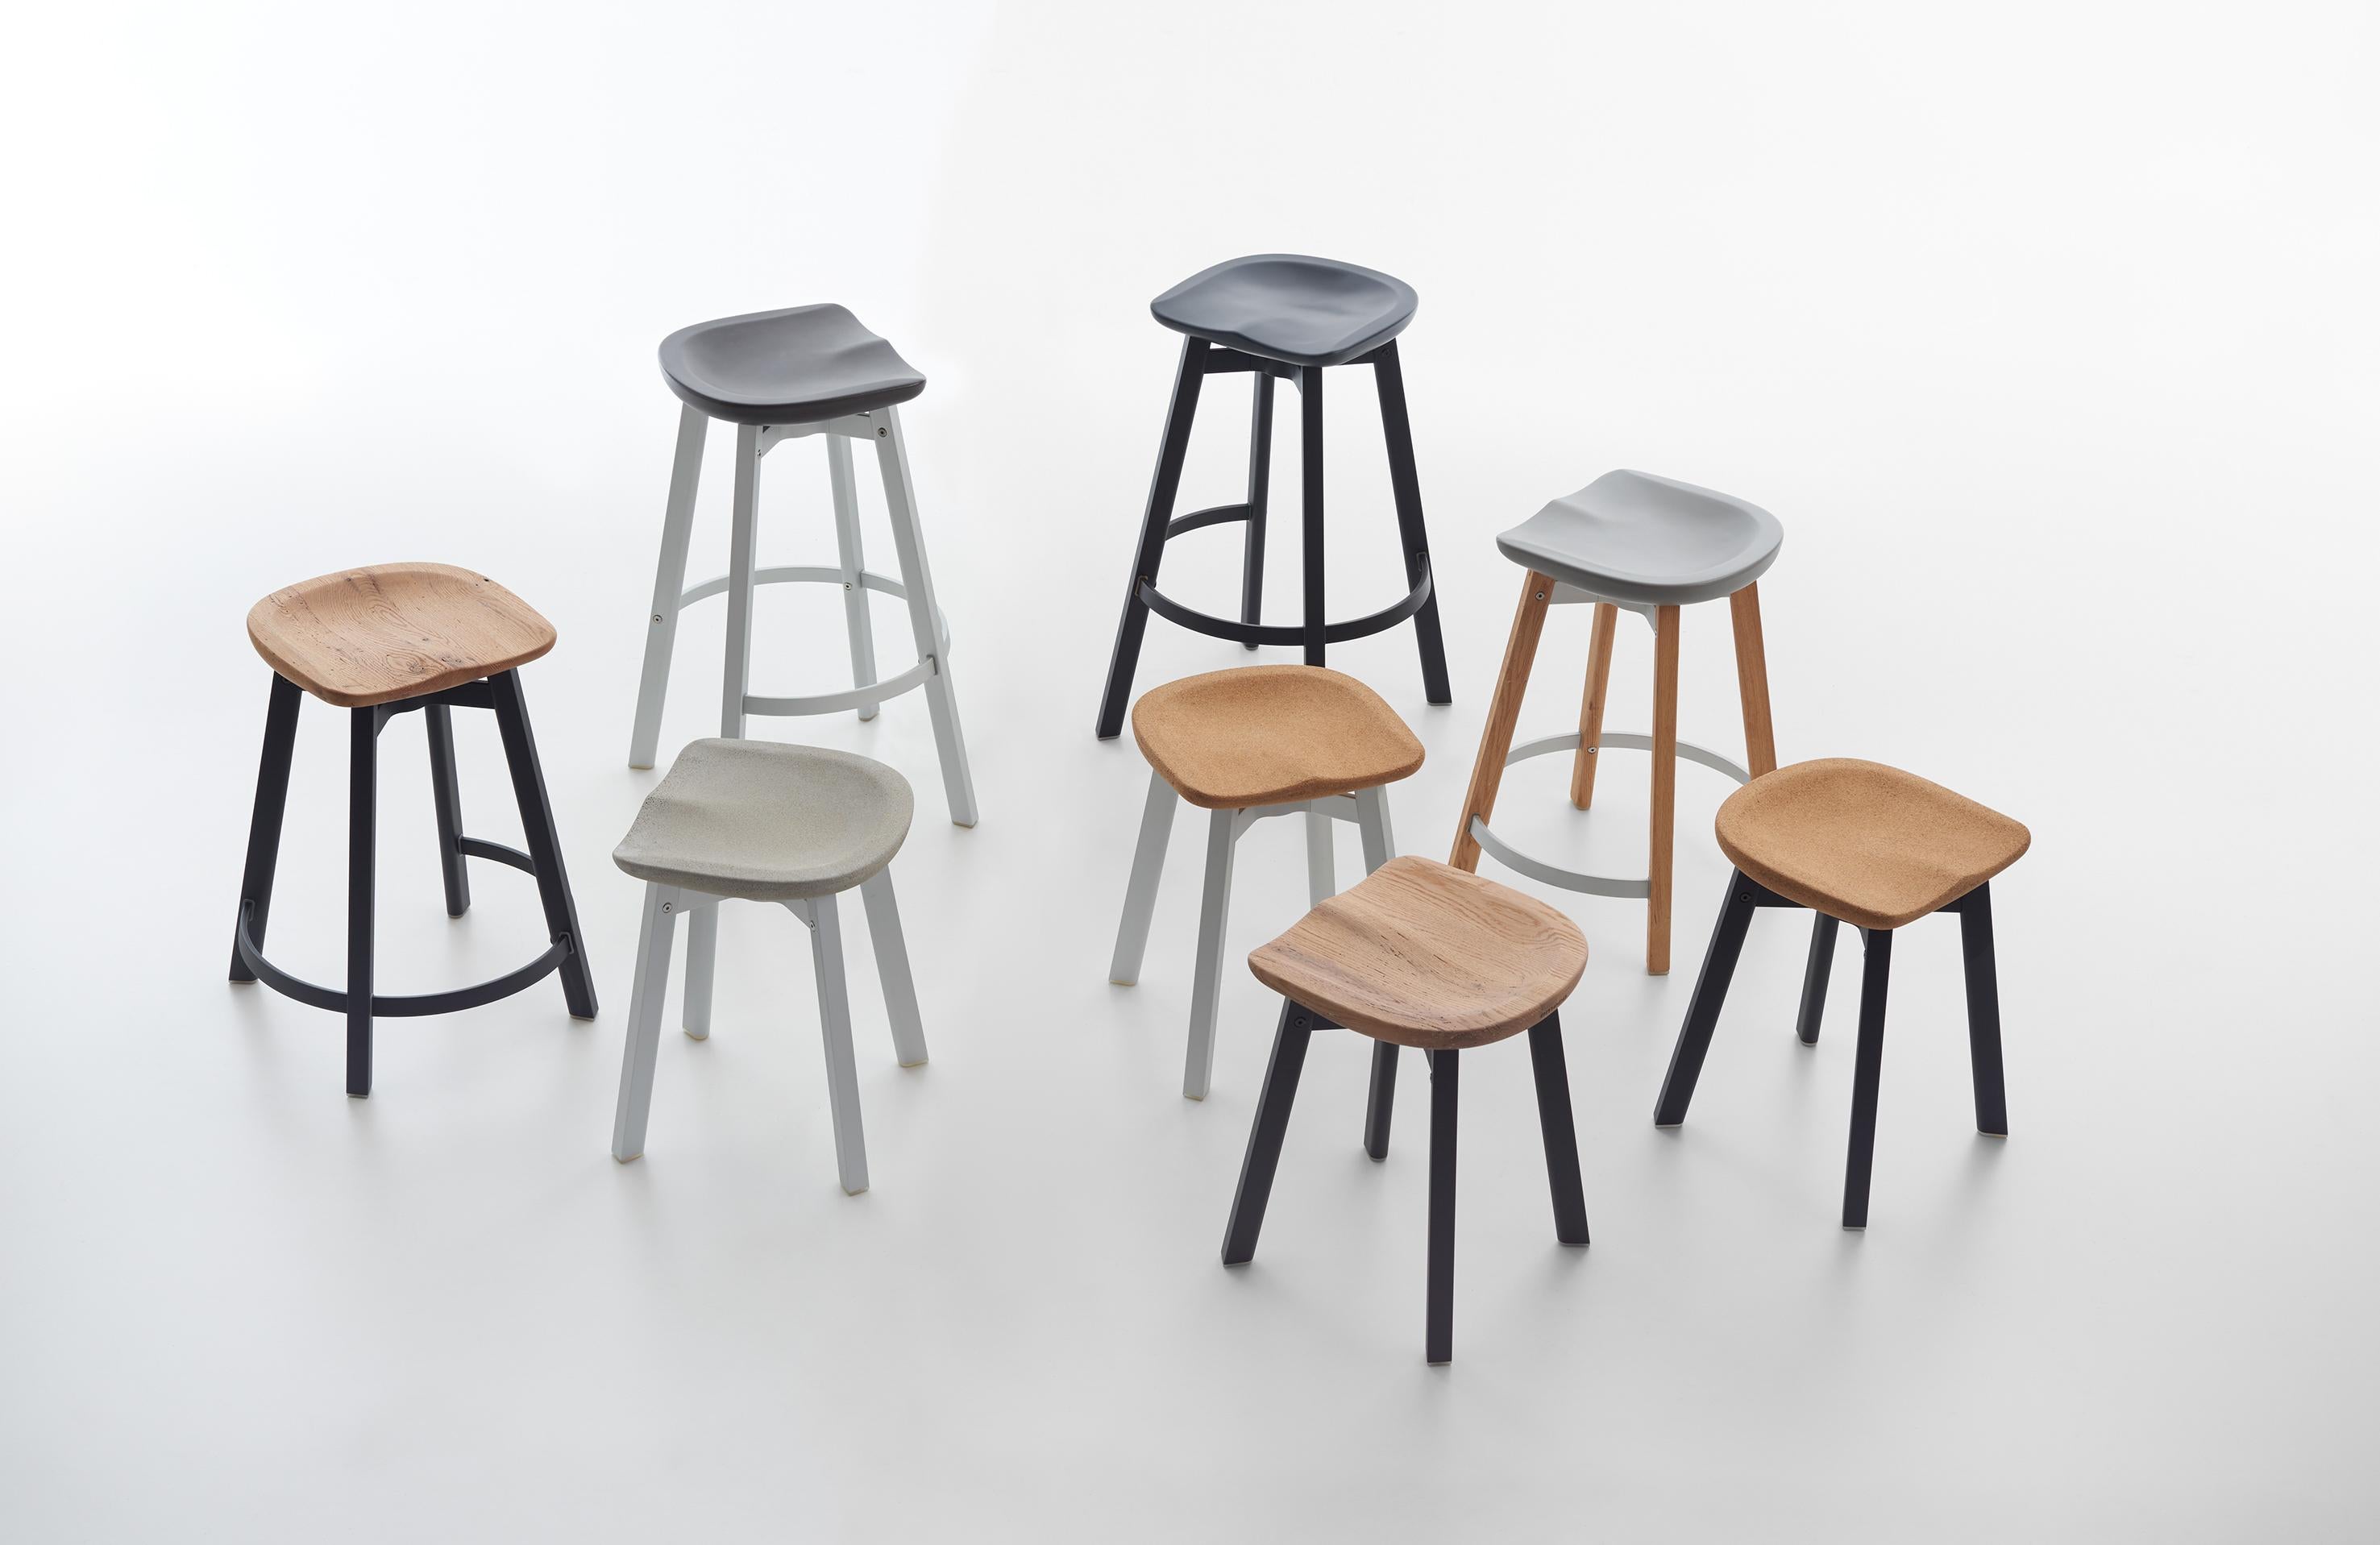 Emeco Su Counter Stool in Black Aluminum with Reclaimed Oak Seat by Nendo In New Condition For Sale In Hanover, PA